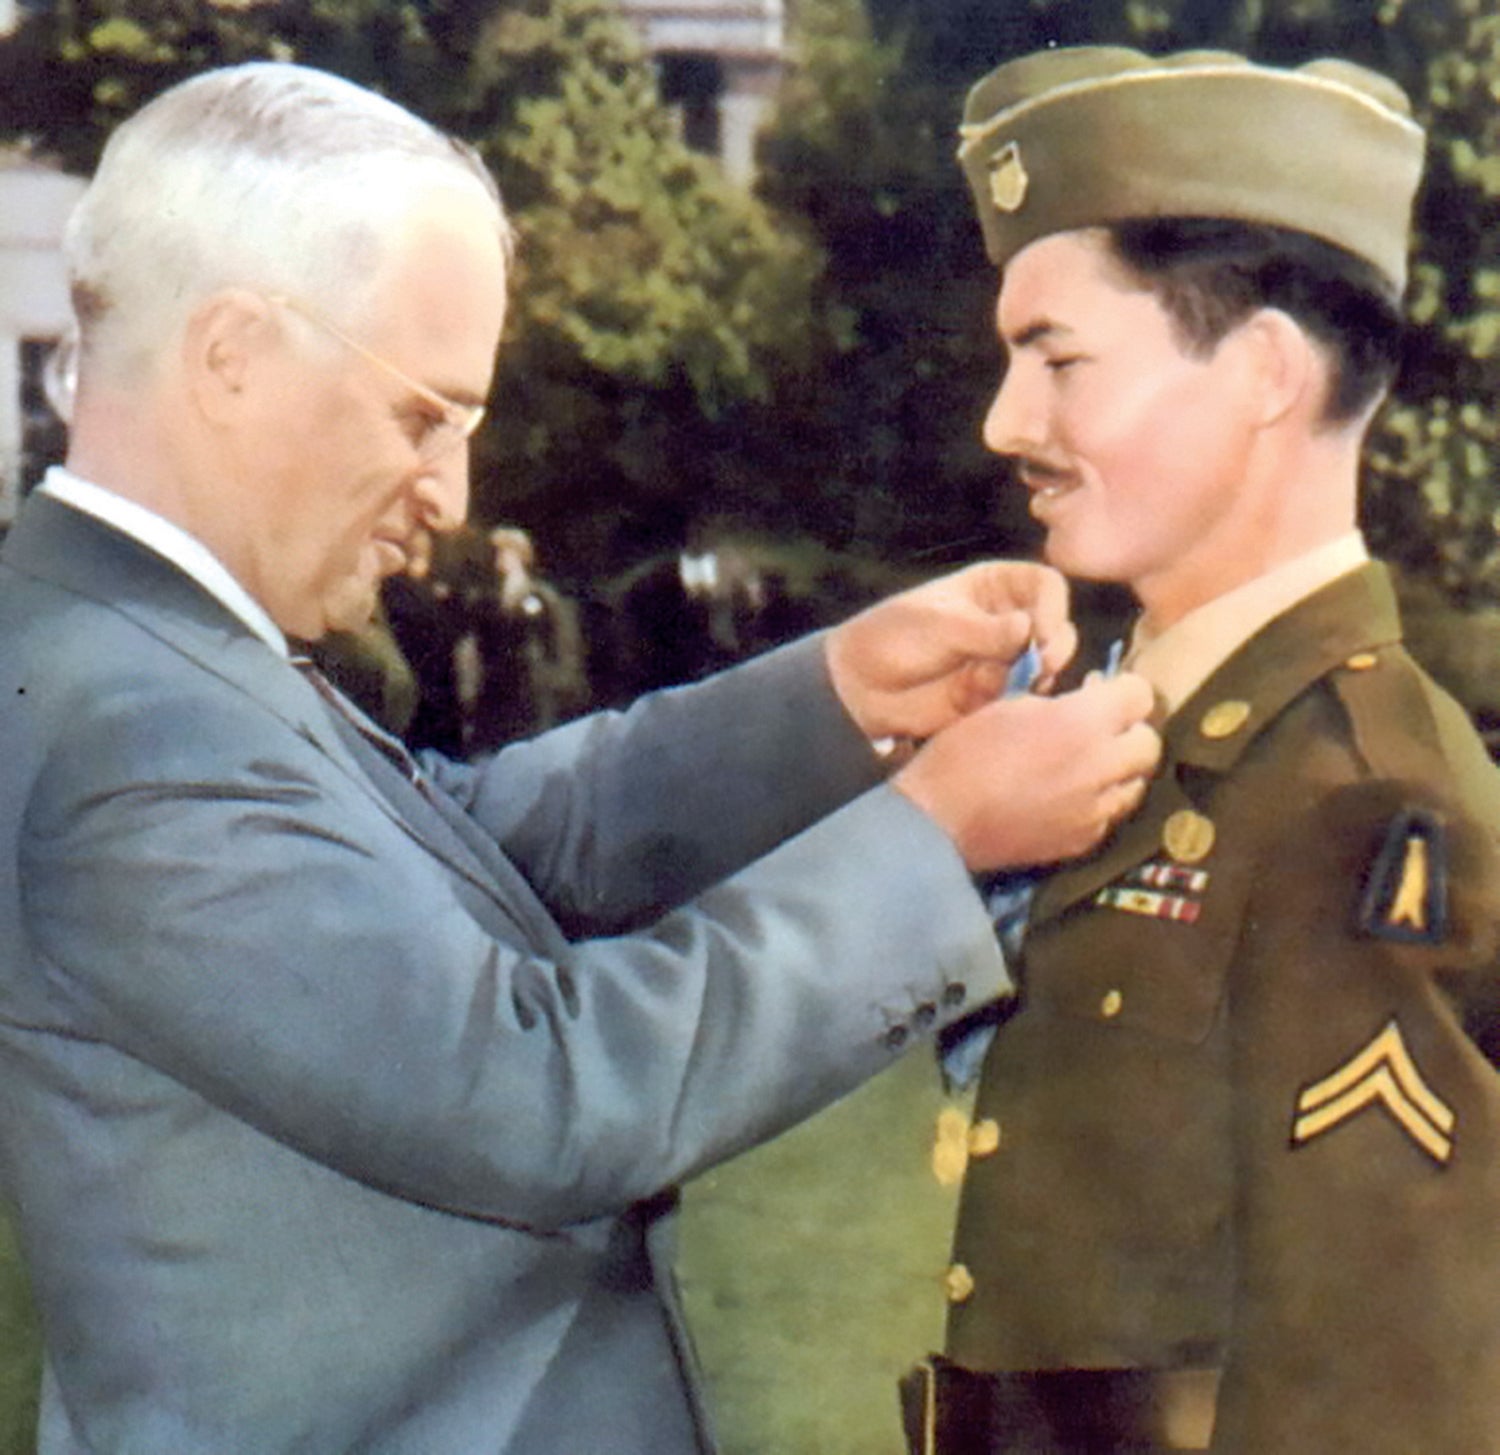 Cpl. Desmond Doss receives the Medal of Honor from President Harry Truman on Oct. 12, 1945. (Credit: Wikipedia)